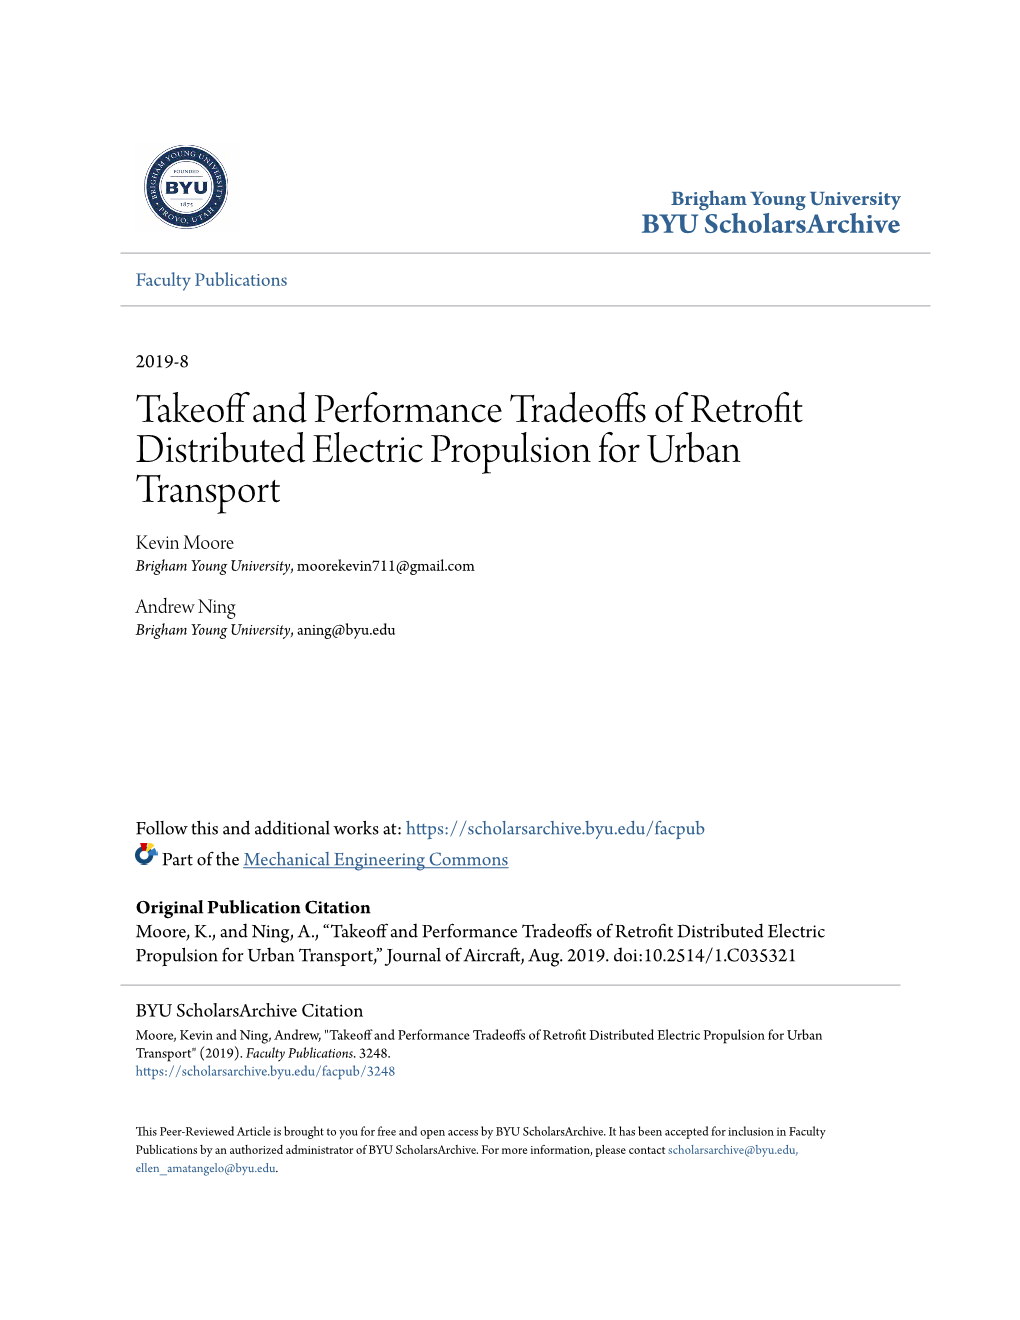 Takeoff and Performance Tradeoffs of Retrofit Distributed Electric